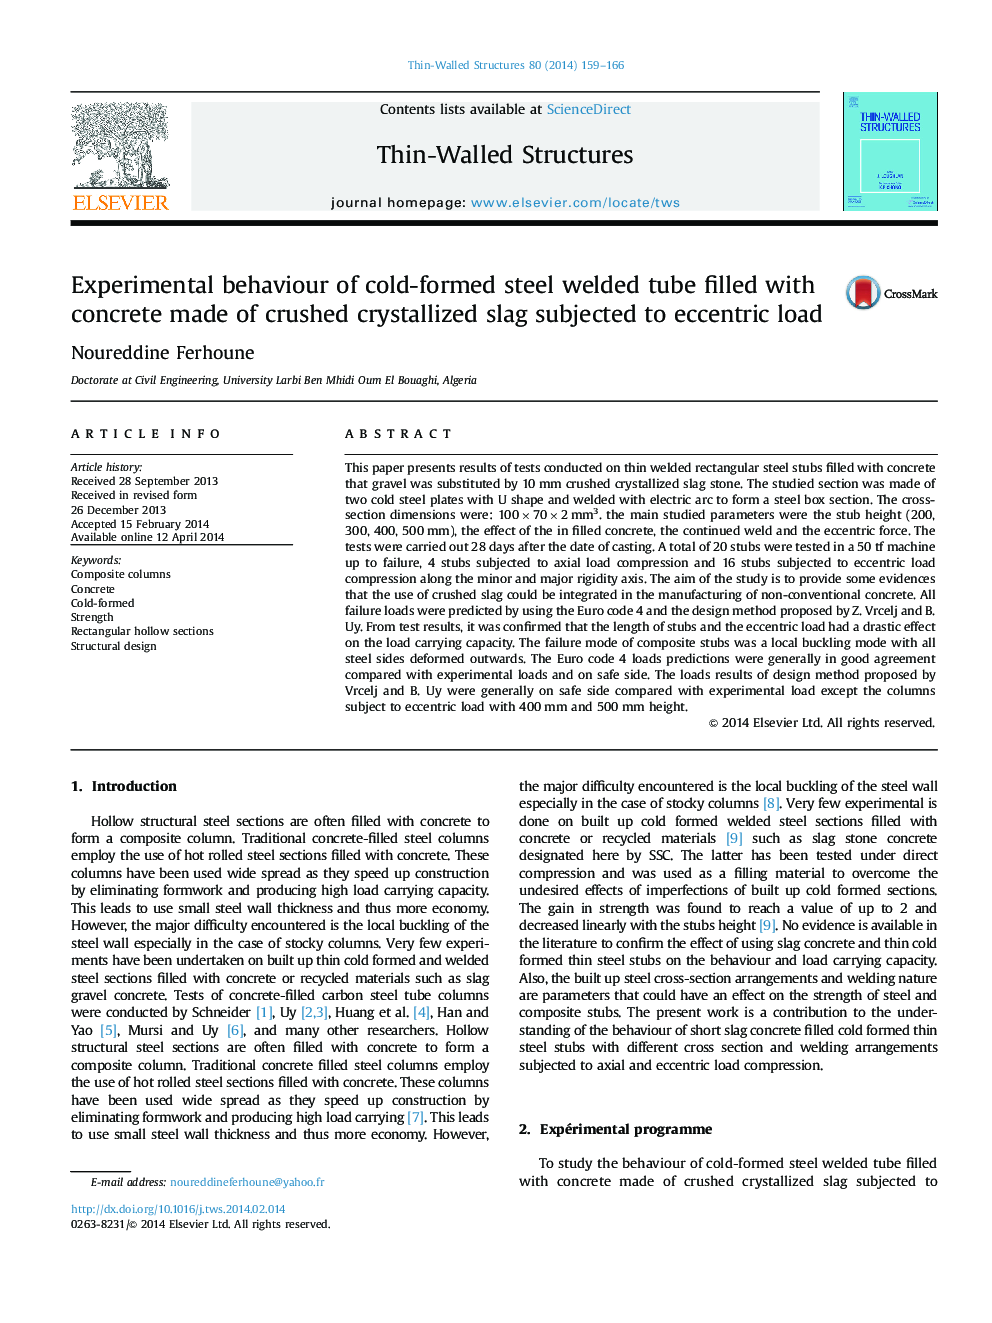 Experimental behaviour of cold-formed steel welded tube filled with concrete made of crushed crystallized slag subjected to eccentric load